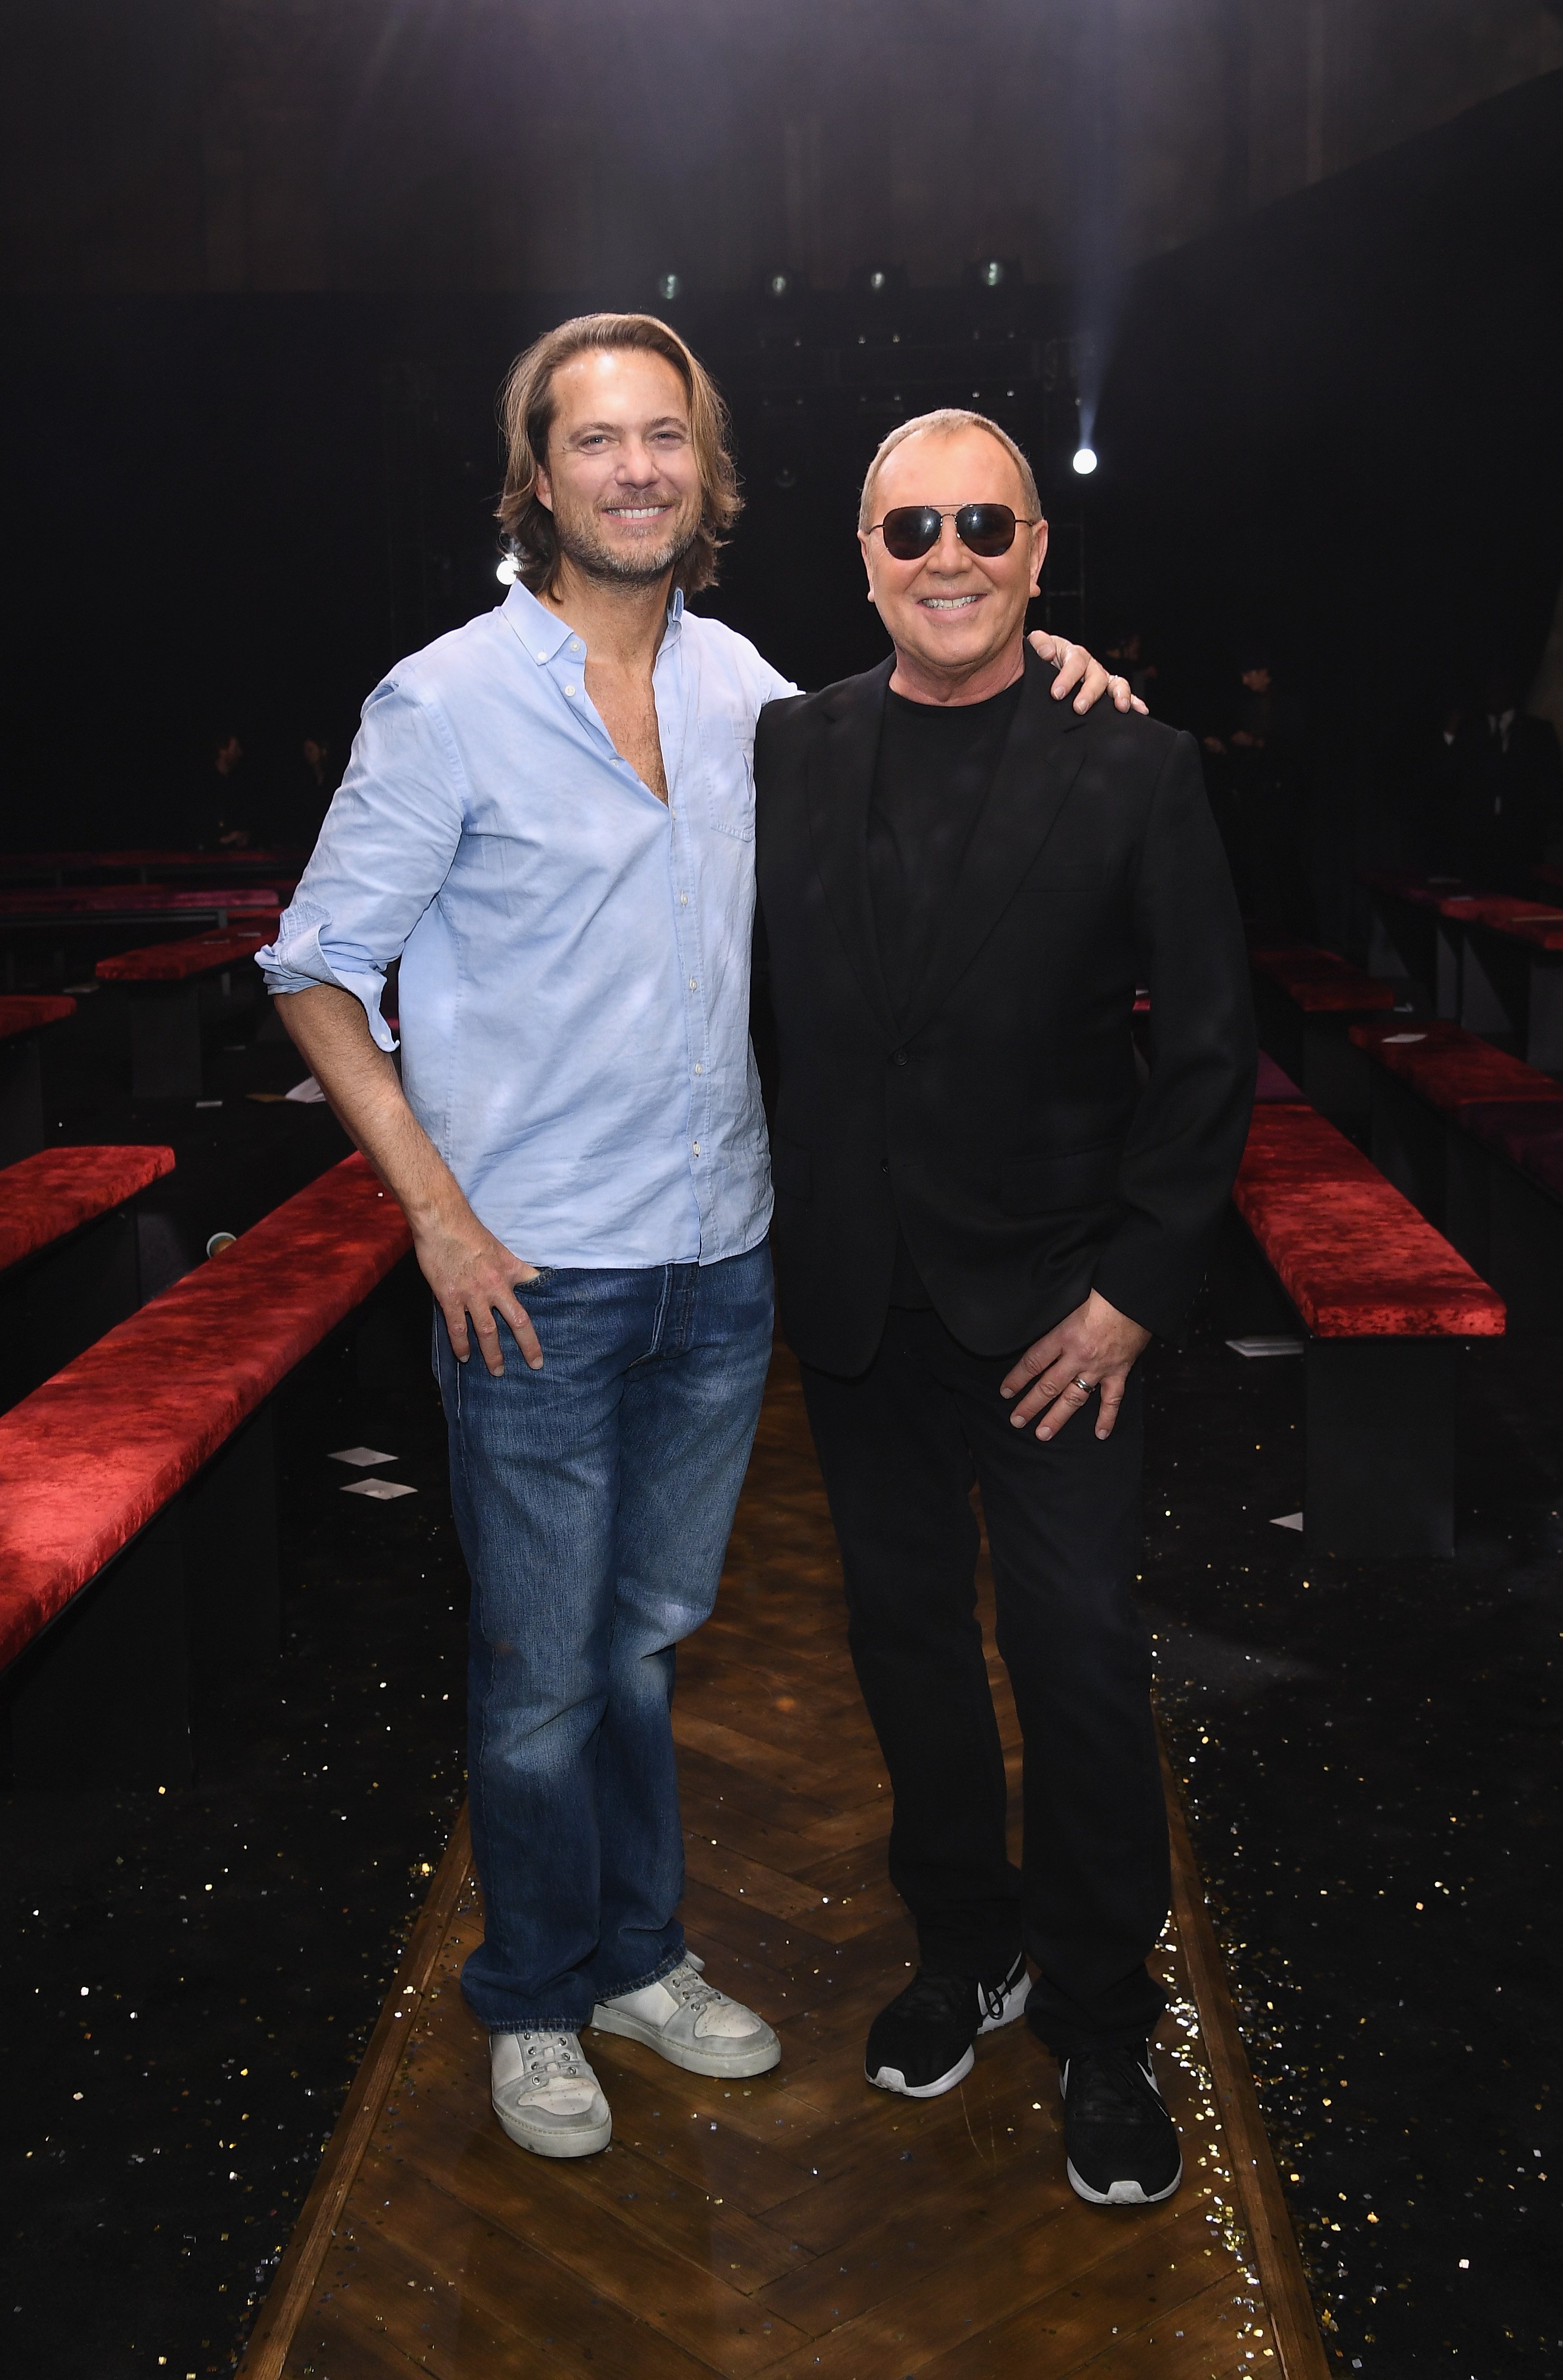 Lance LePere (L) and Michael Kors pose on the runway during Michael Kors Collection Fall 2019 Runway Show at Cipriani Wall Street on February 13, 2019, in New York City. | Source: Getty Images.